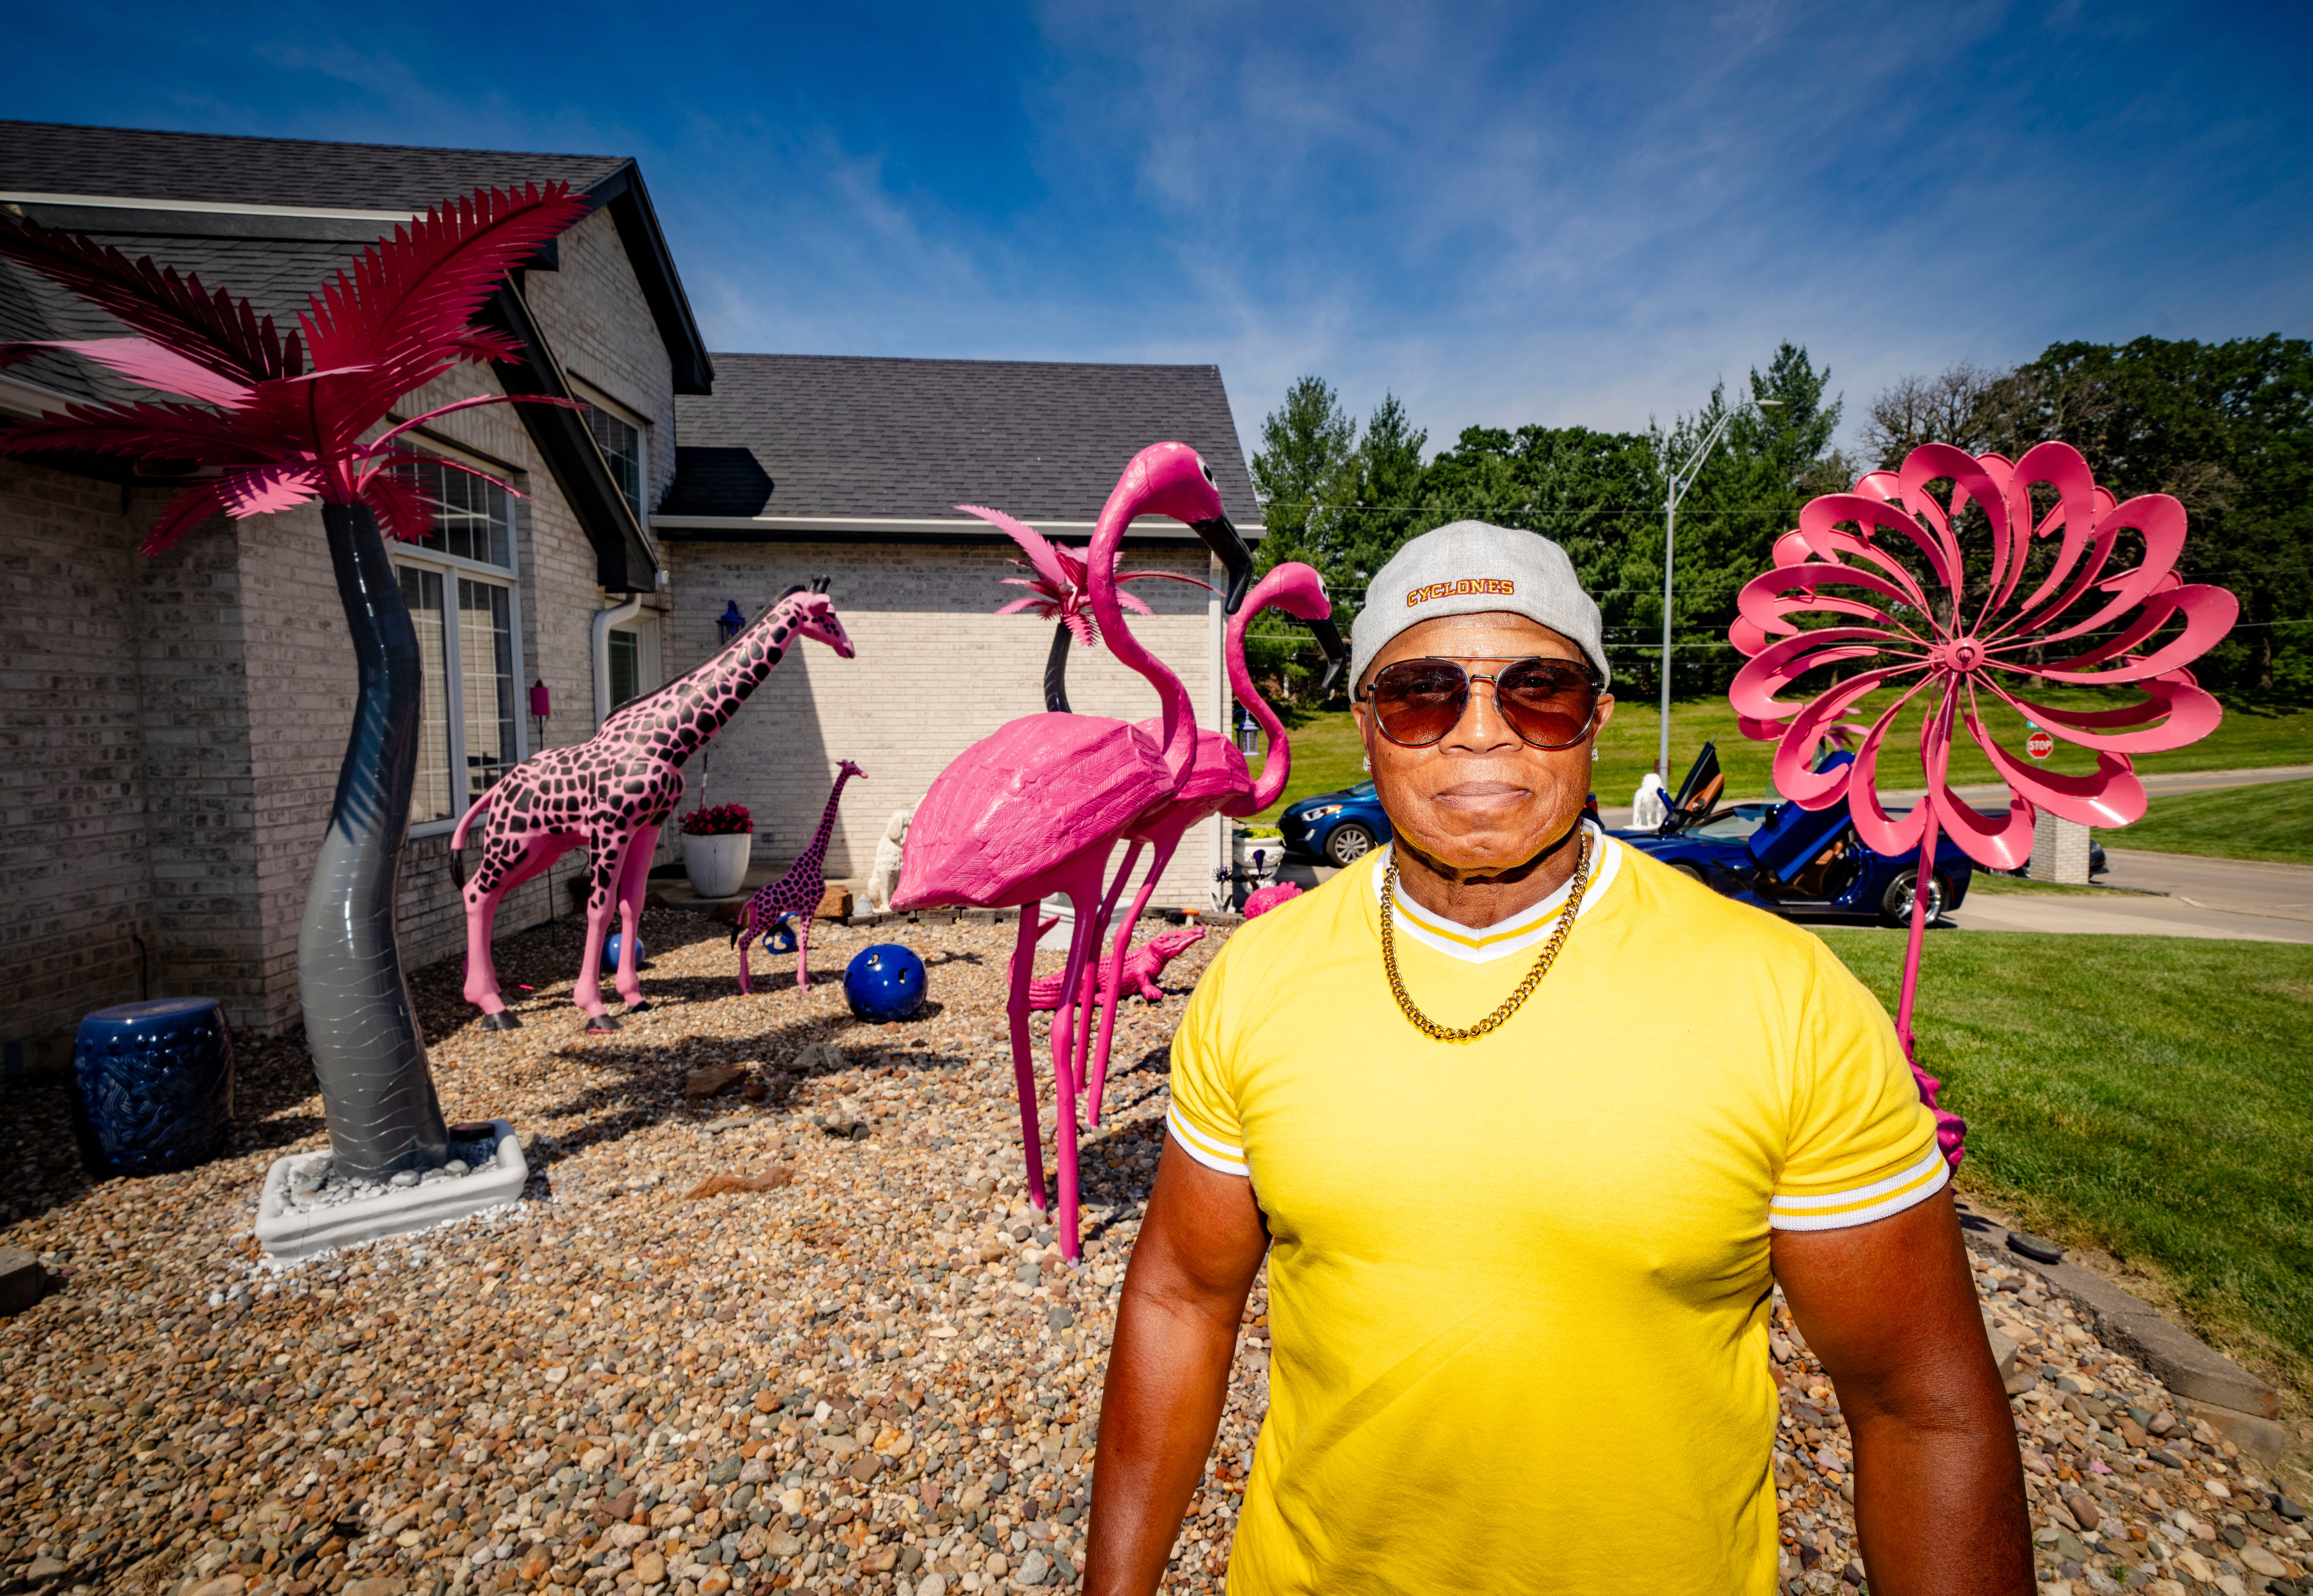 'I'm the king of the jungle': Saylorville man's hot pink statues draw visitors, fights